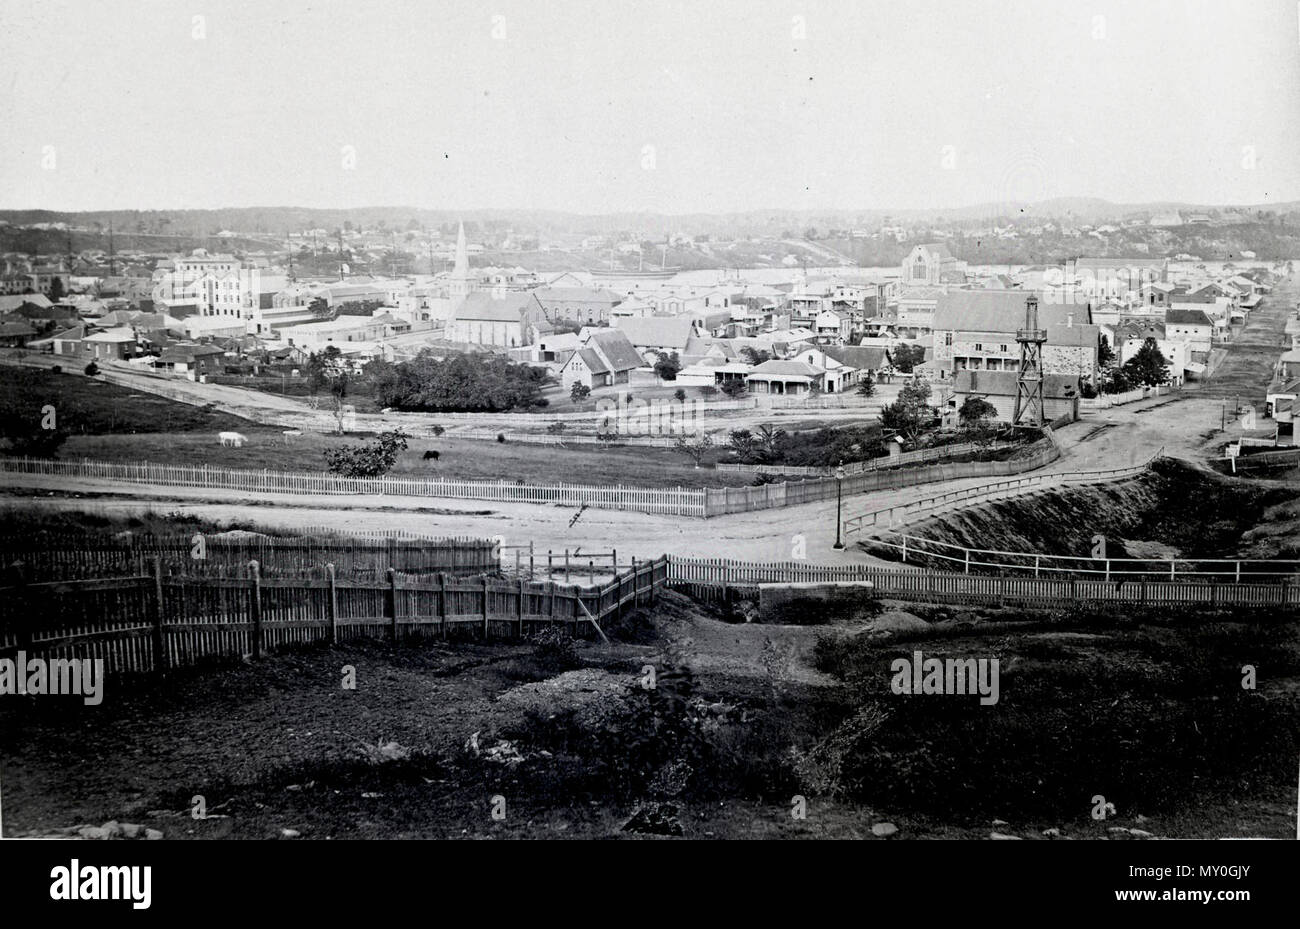 Brisbane from Wickham Terrace, 1880s. The Brisbane Courier 19 November 1883  A VOICE FROM WICKHAM-TERRACE. 3424141 )   TO THE EDITOR OF THE BRISBANE COURIER.  Sir,-I would call your attention to the fact that the residents of this locality would be very glad of some means of conveyance from Queen street on these scorching days, and I would suggest that one of the Gregory-terrace omnibuses would alter their route and go up the terrace at 1 o'clock every day. I know of several residents of that place who would gladly support the movement. Trusting you will give the proprietor this hint at your e Stock Photo